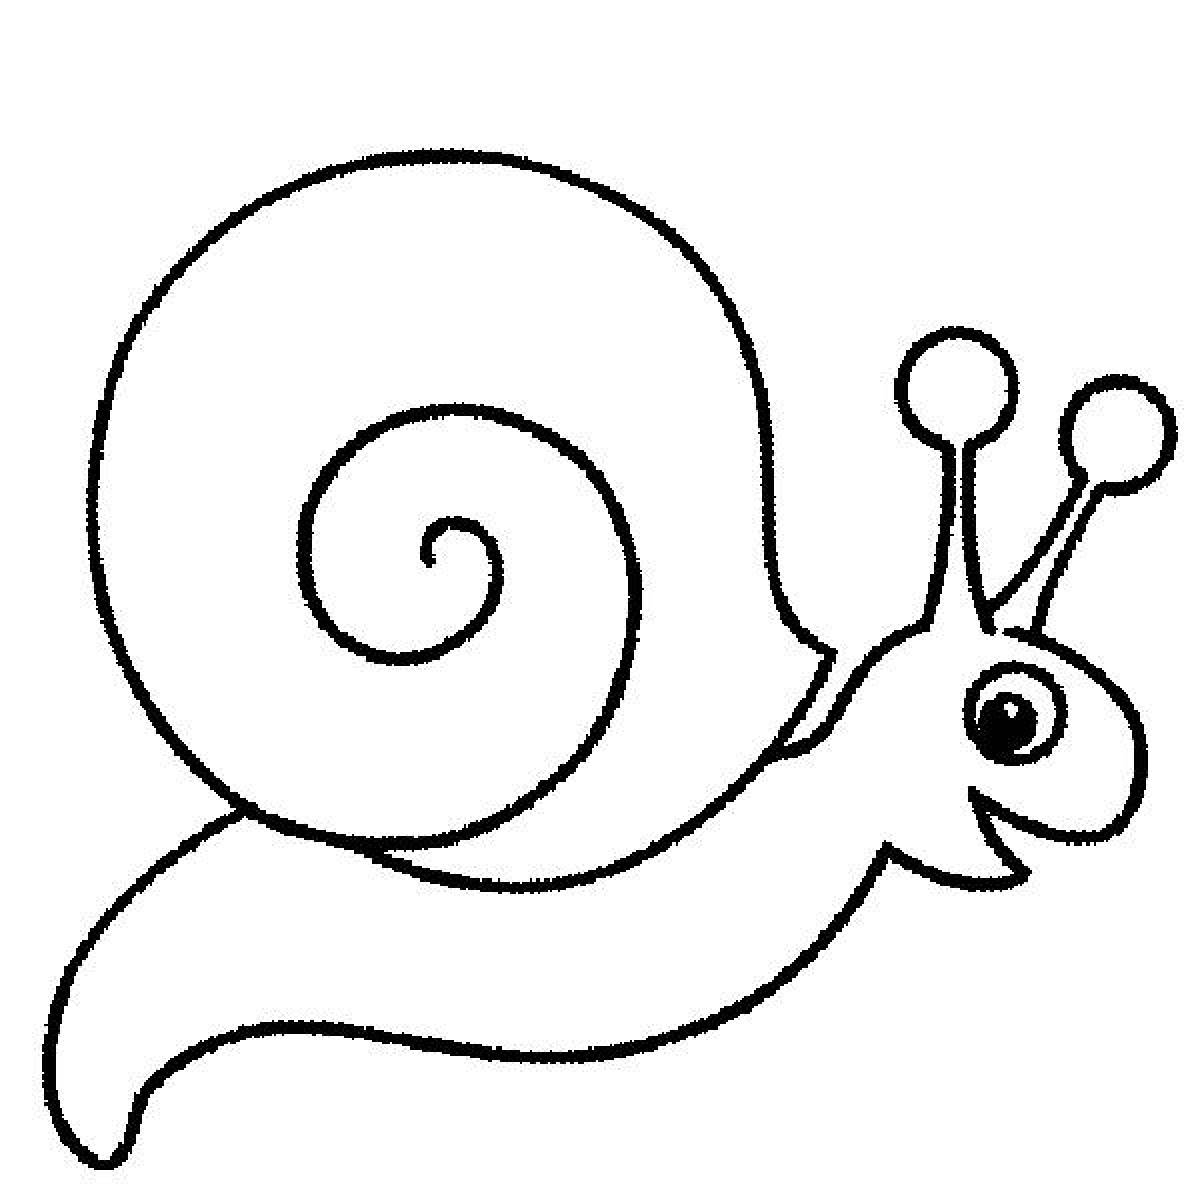 Coloring snail for children